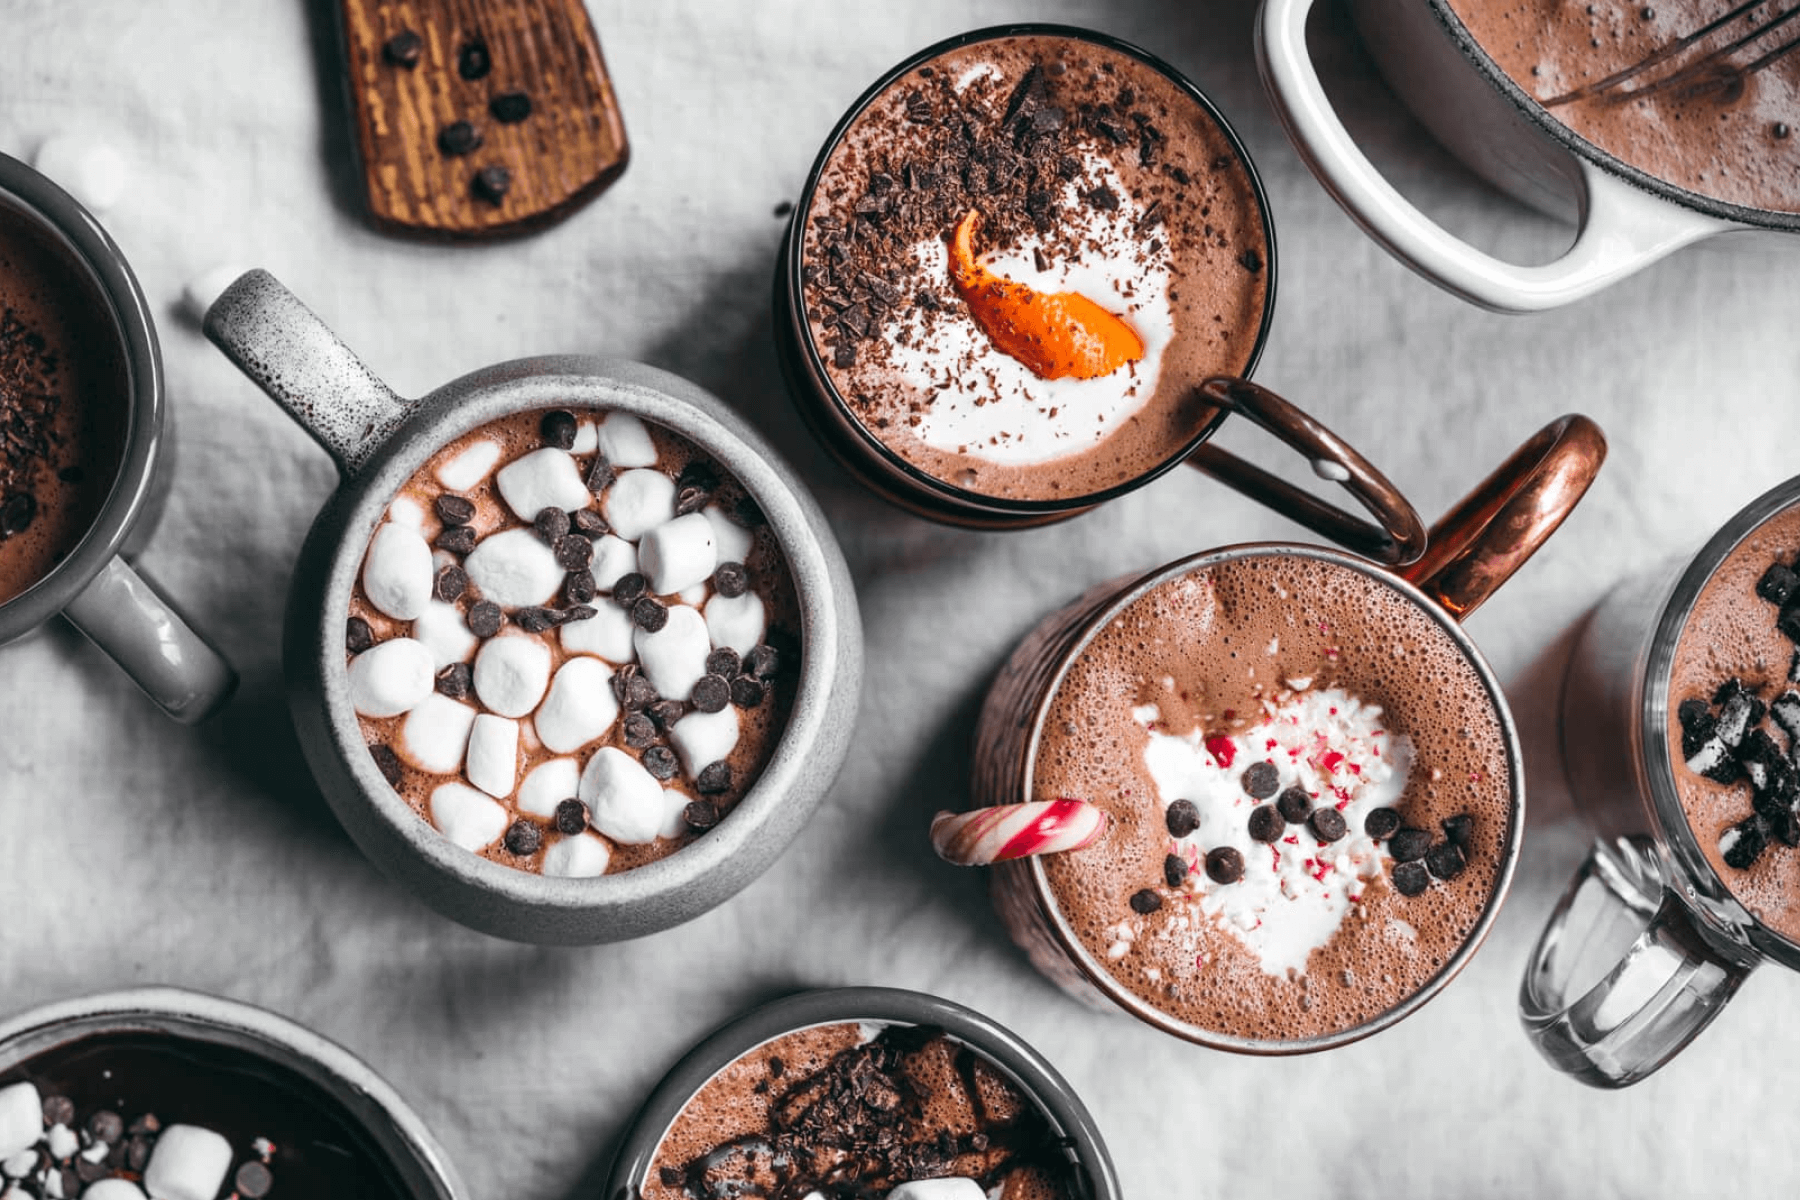 Several mugs of hot chocolate with various sweet toppings like marshmallows, chocolate chips, and candy canes.